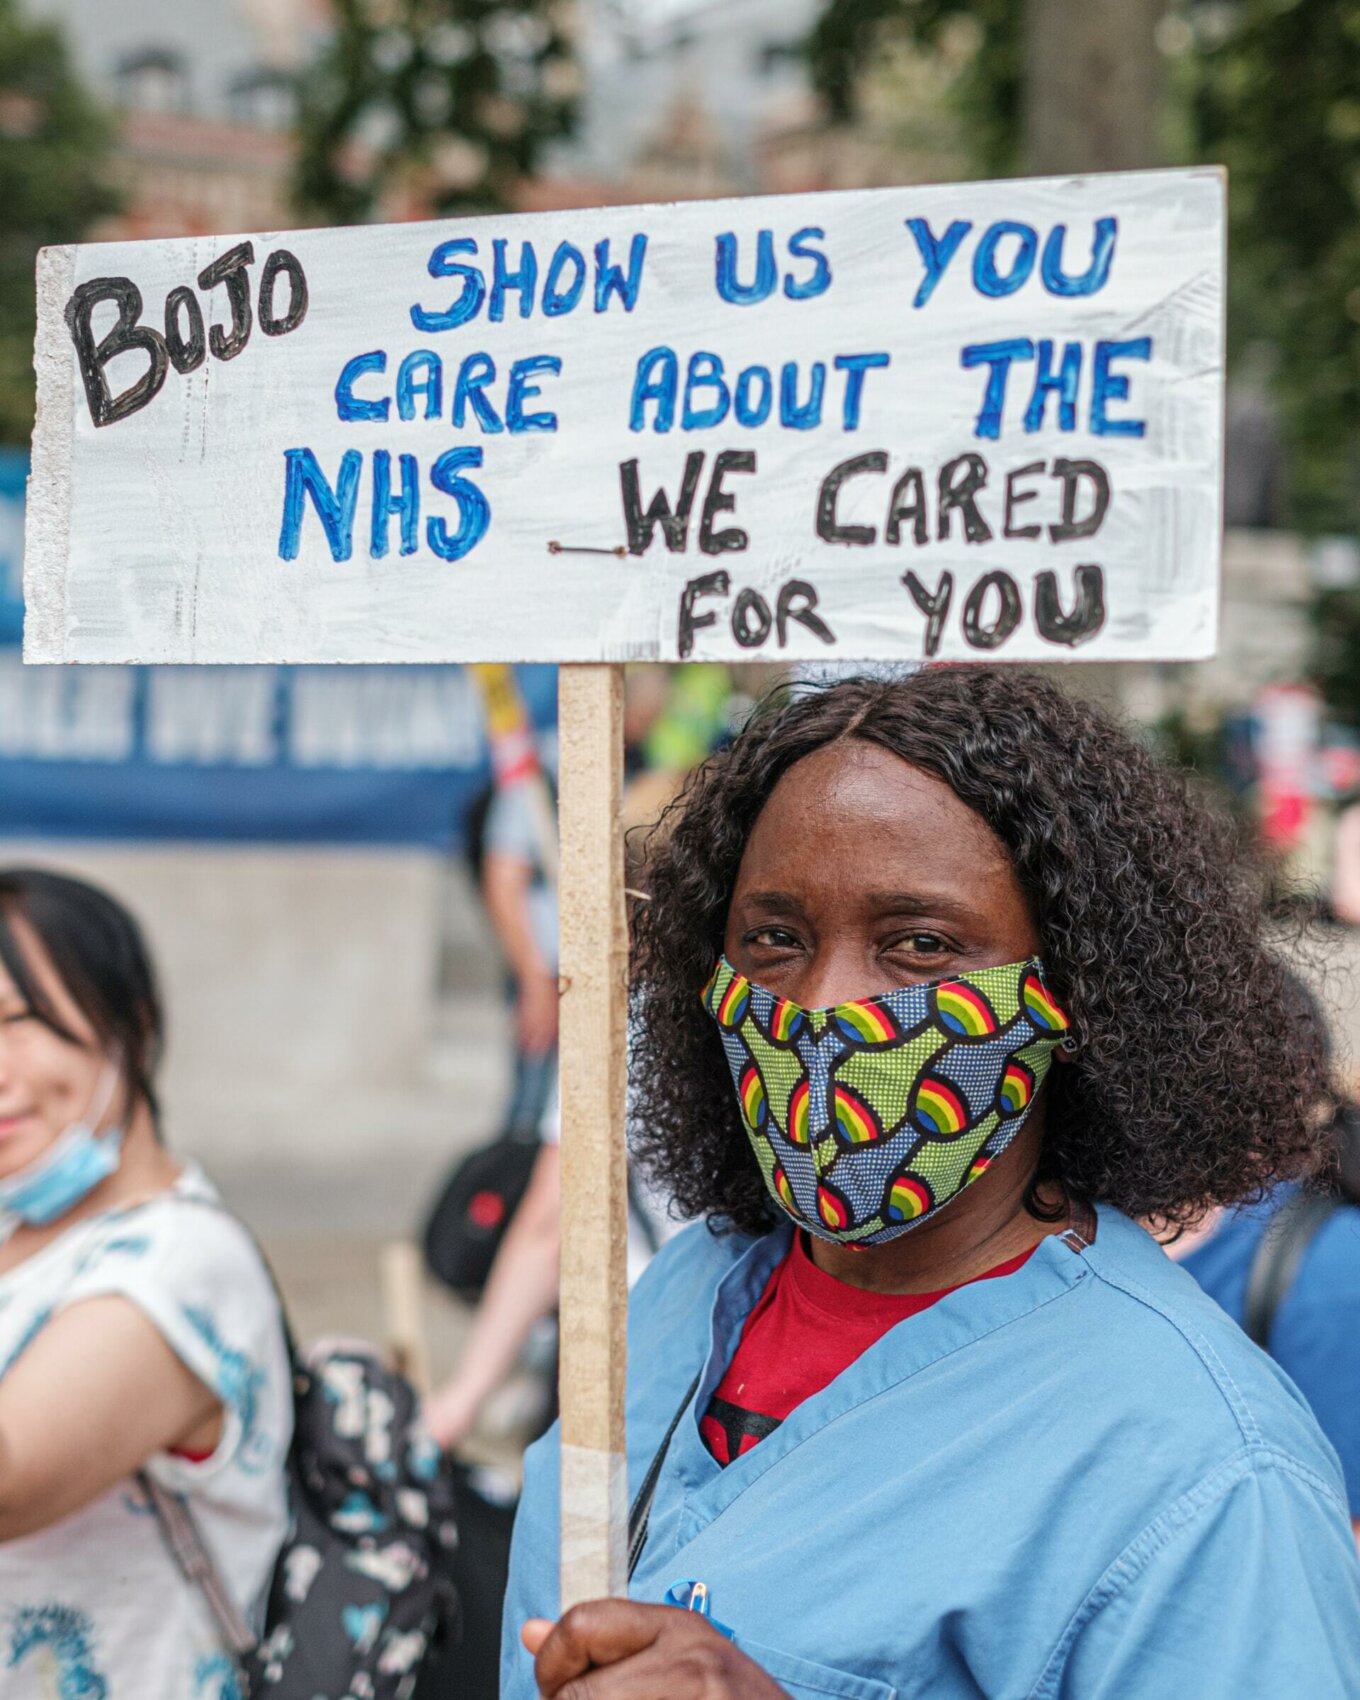 A Black woman wearing scrubs has a sign that says "BoJo show us you care about the NHS... we cared for you"